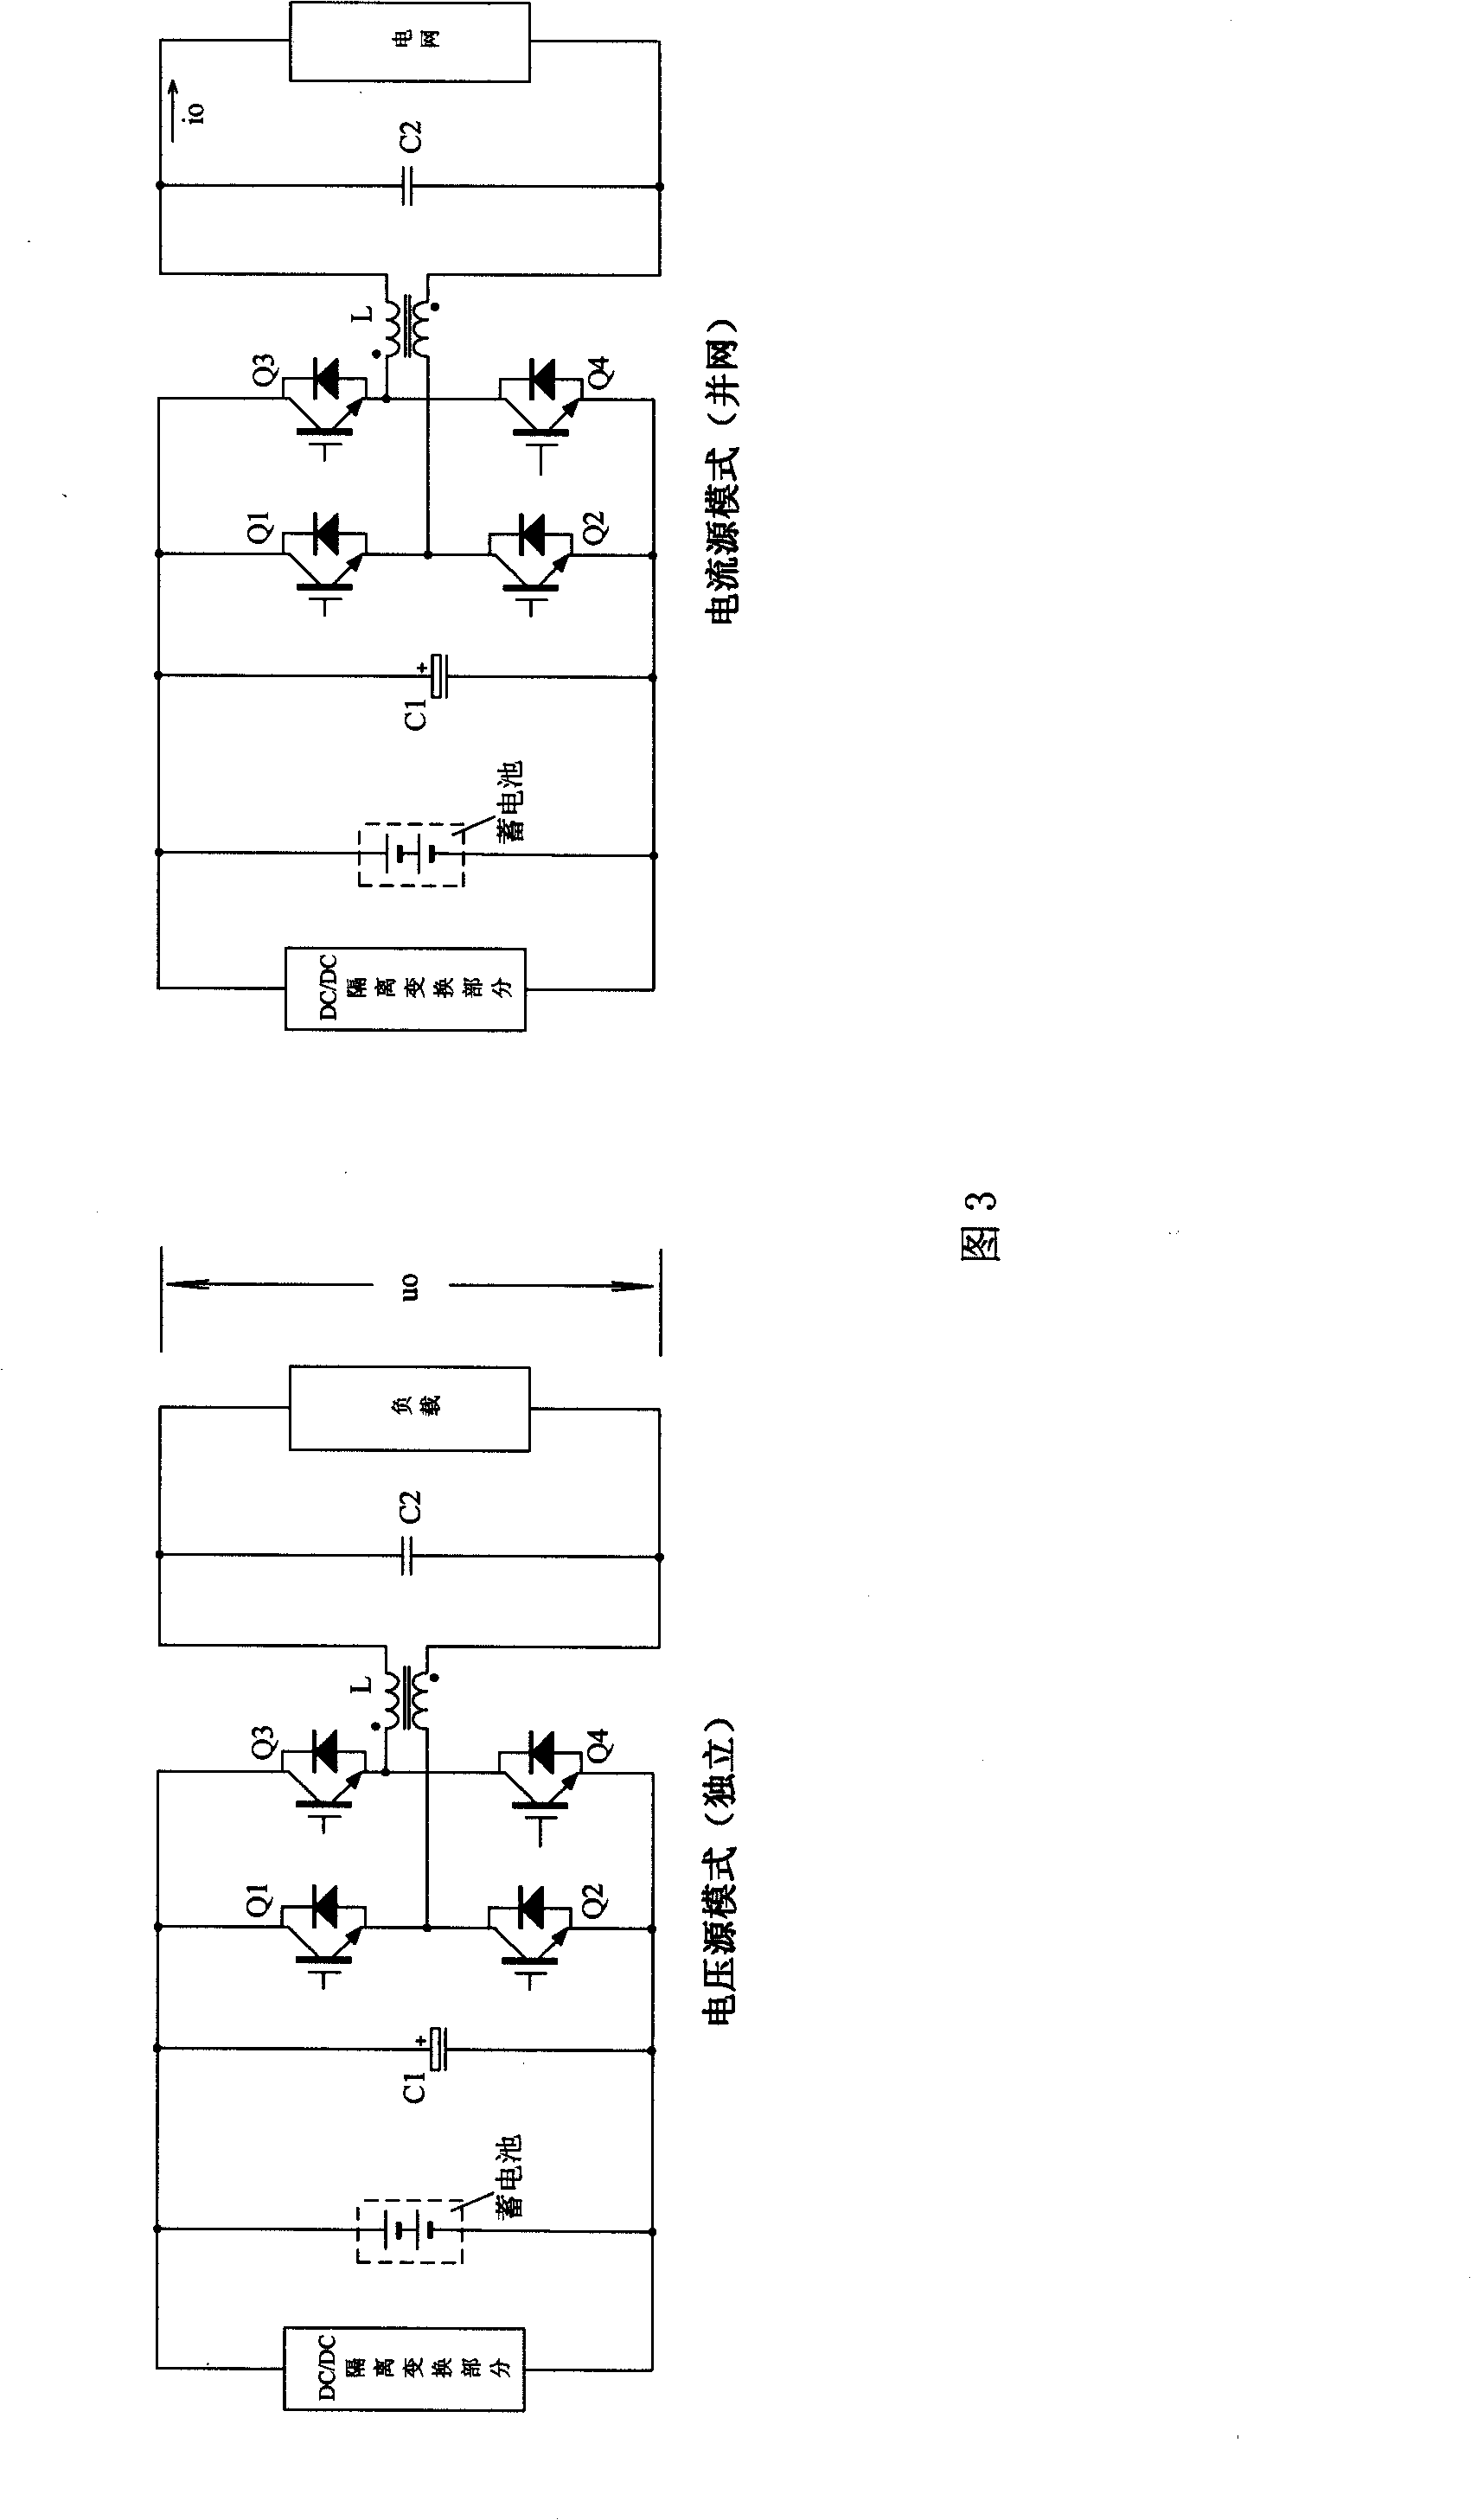 Photovoltaic power generation system with grid-connected generation, independent power generation and UPS function